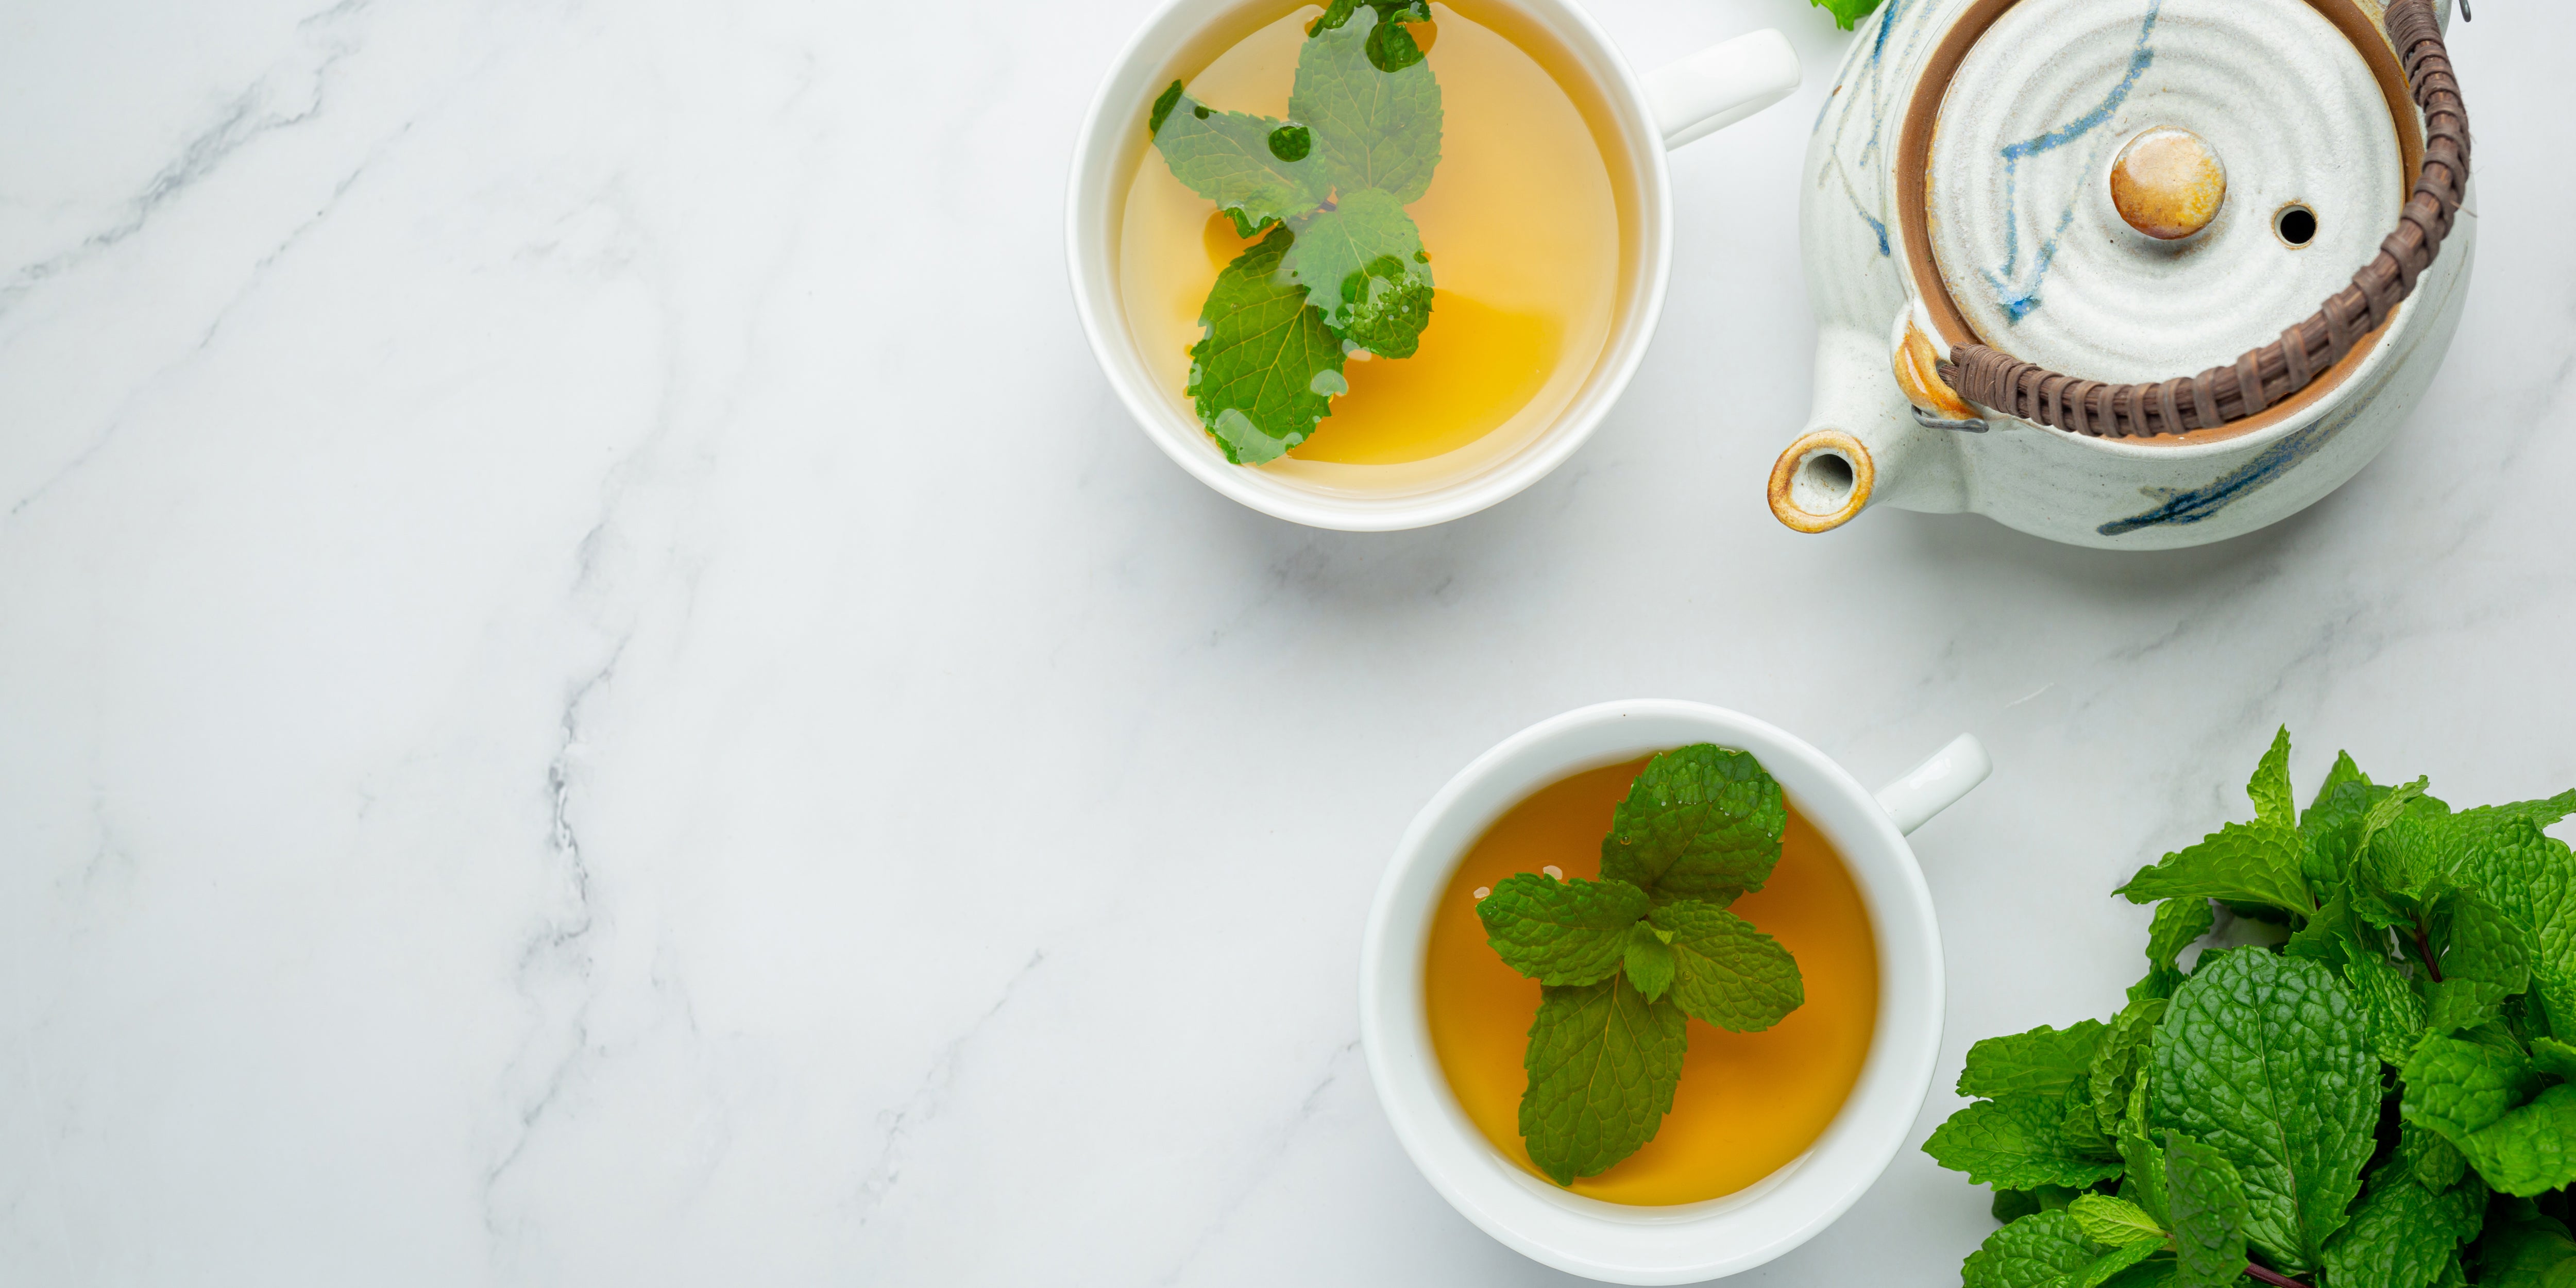 Peppermint tea from healthy and hygiene